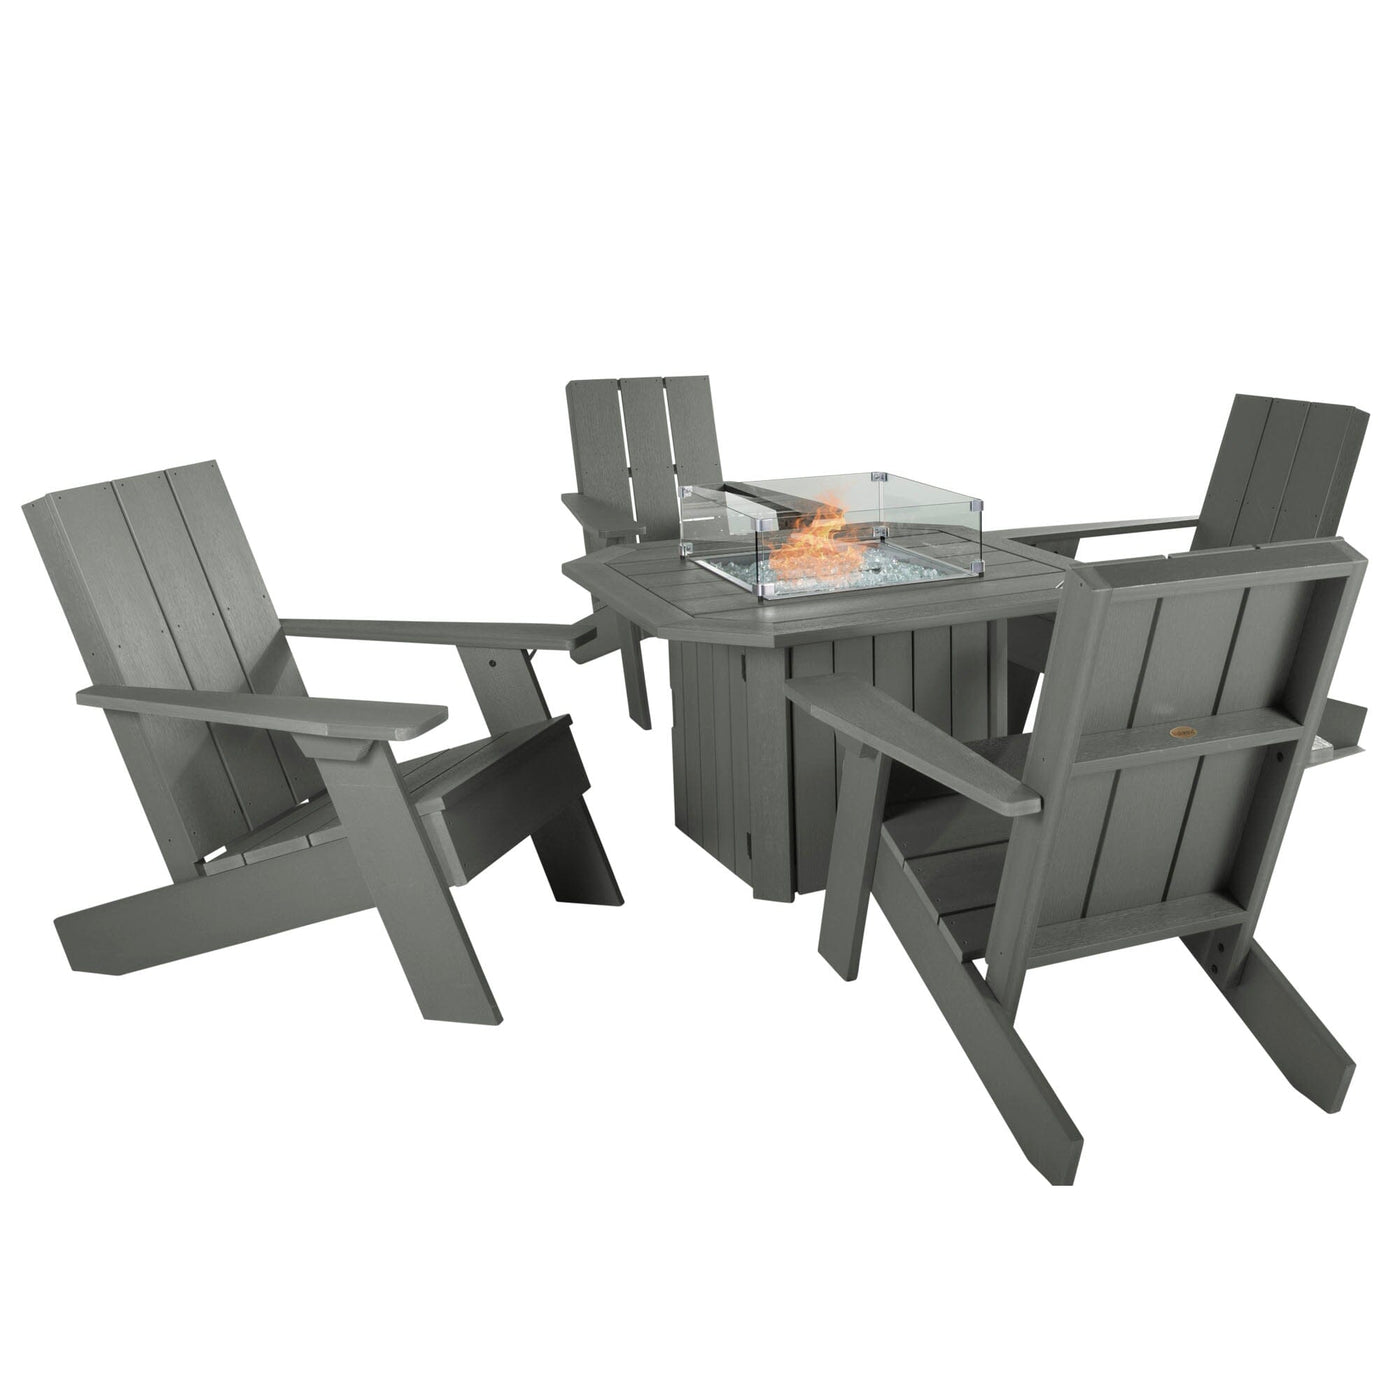 Italica Modern Adirondack 5-Piece Conversation Set with Fire Pit Table Kitted Sets Highwood USA 